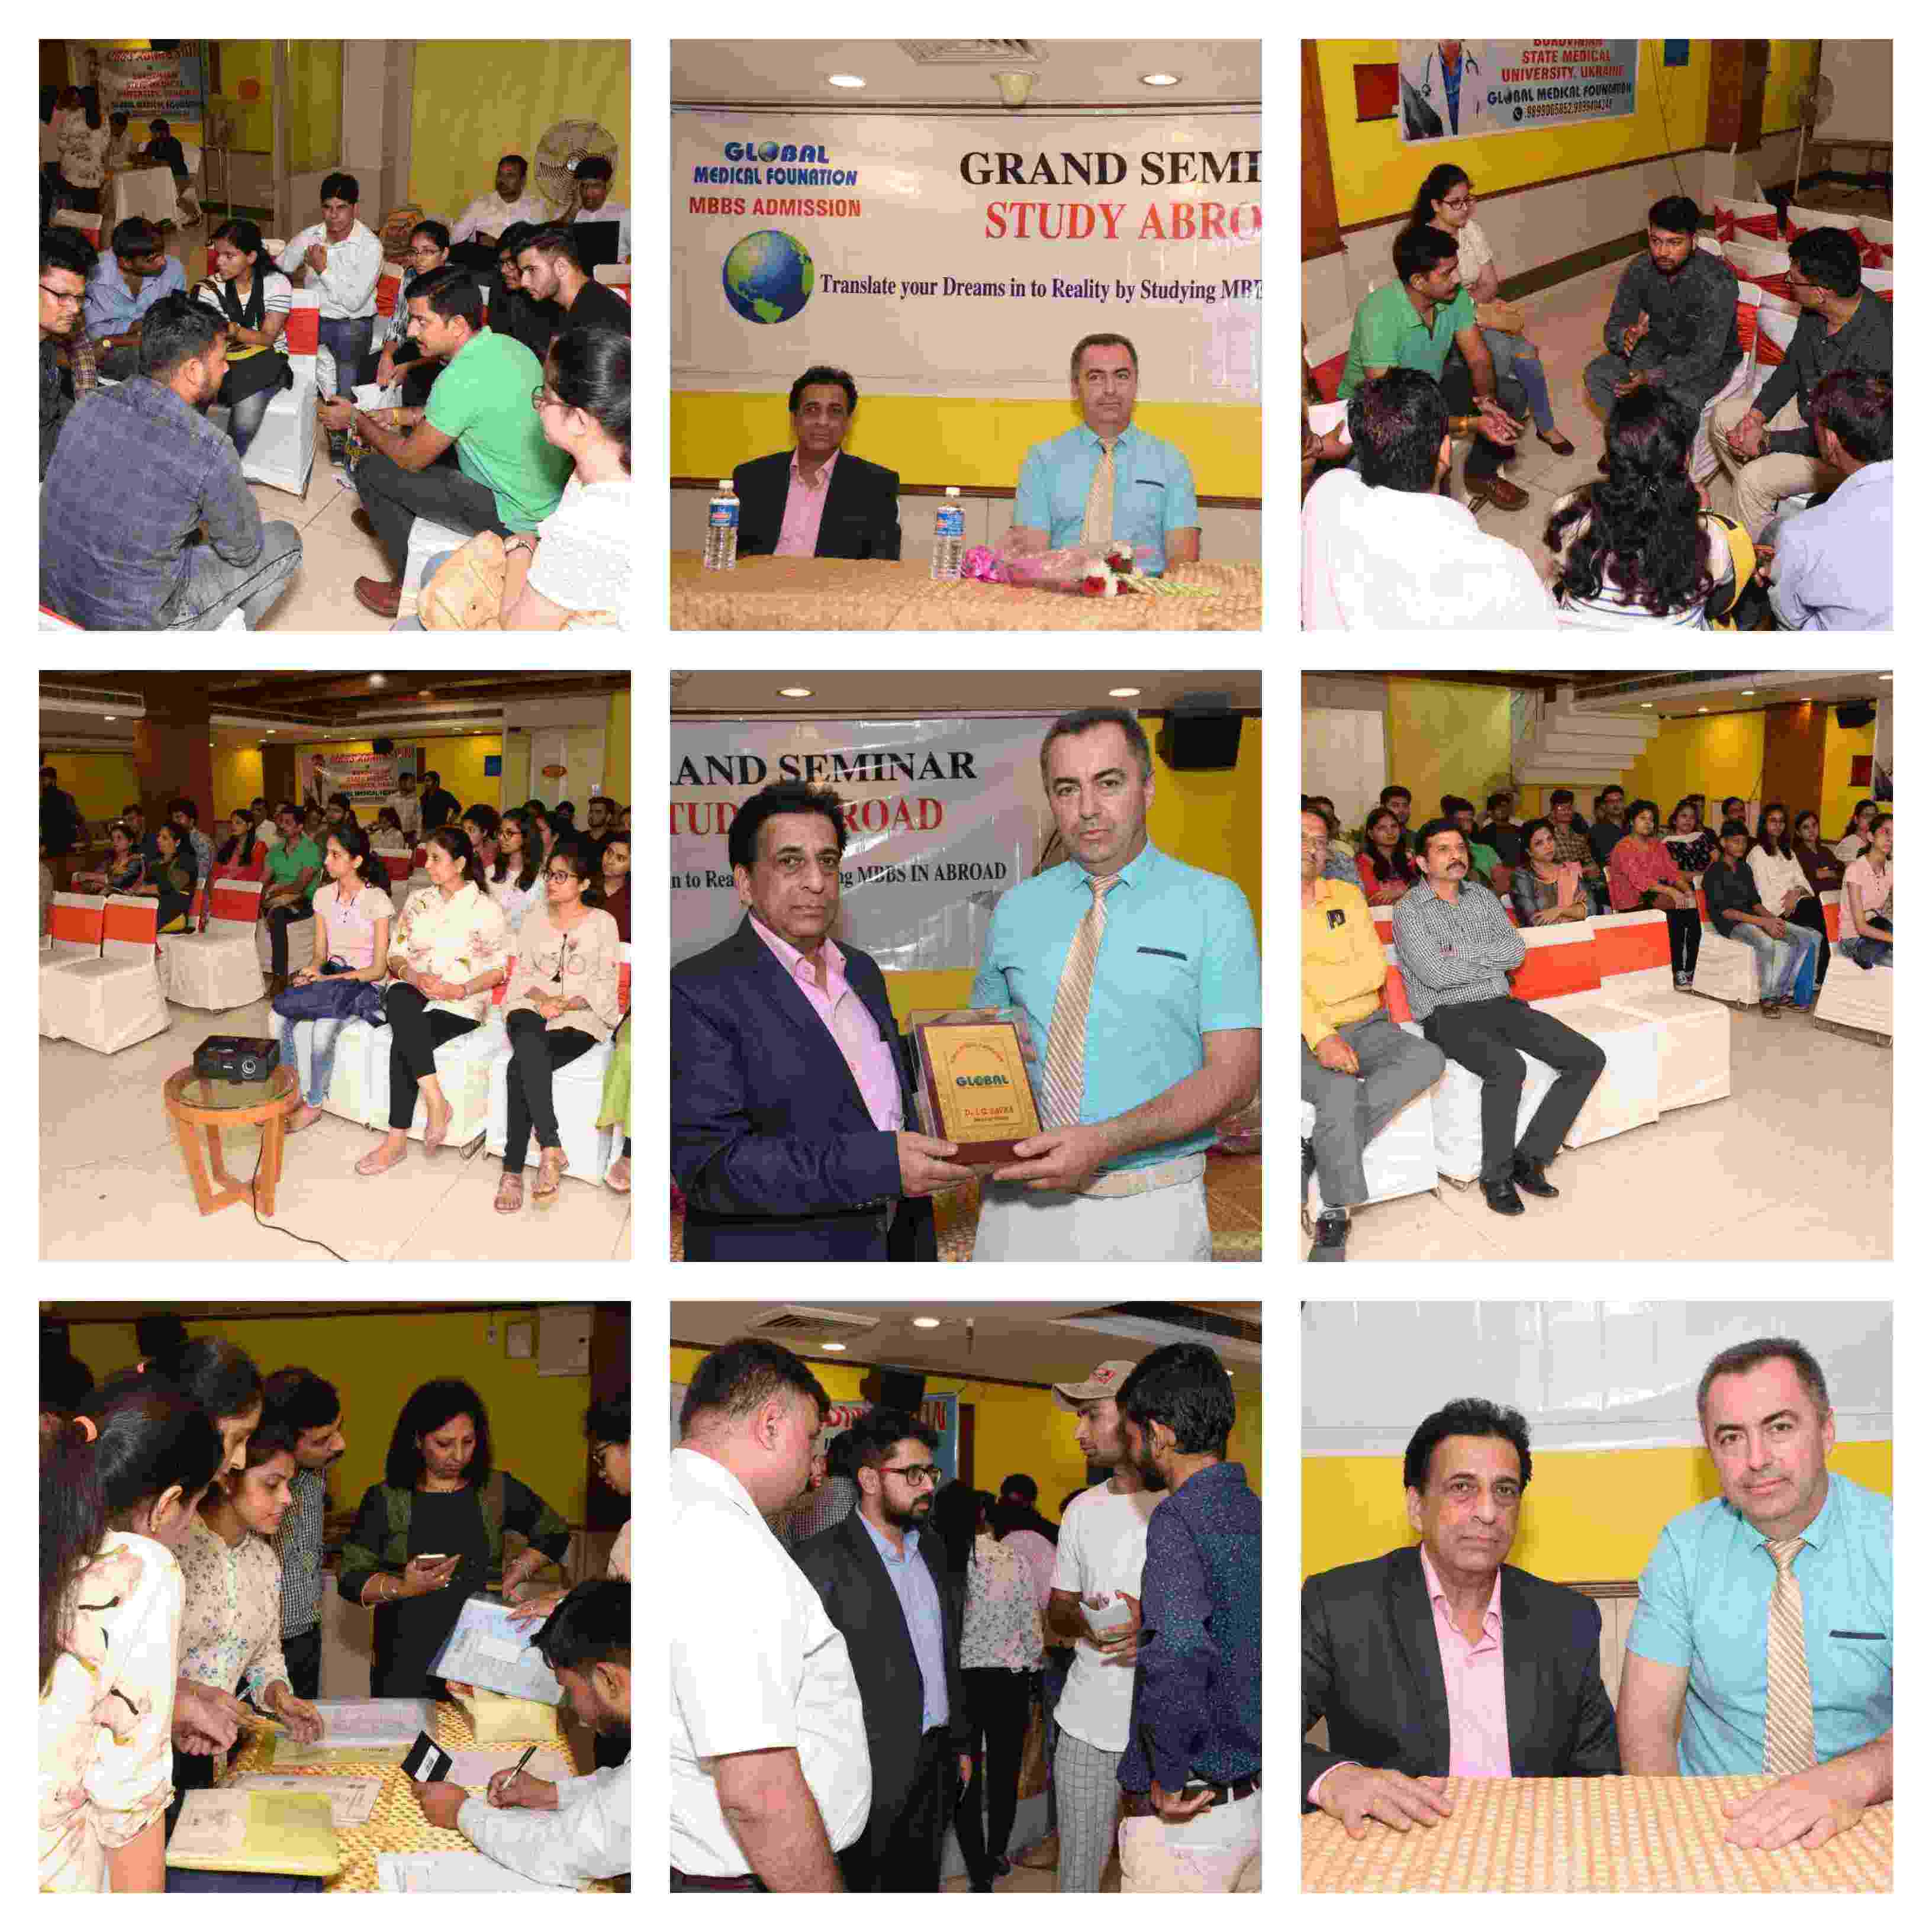 A collage of photos showing Bukovinian State Medical University Seminar by Global Medical Foundation